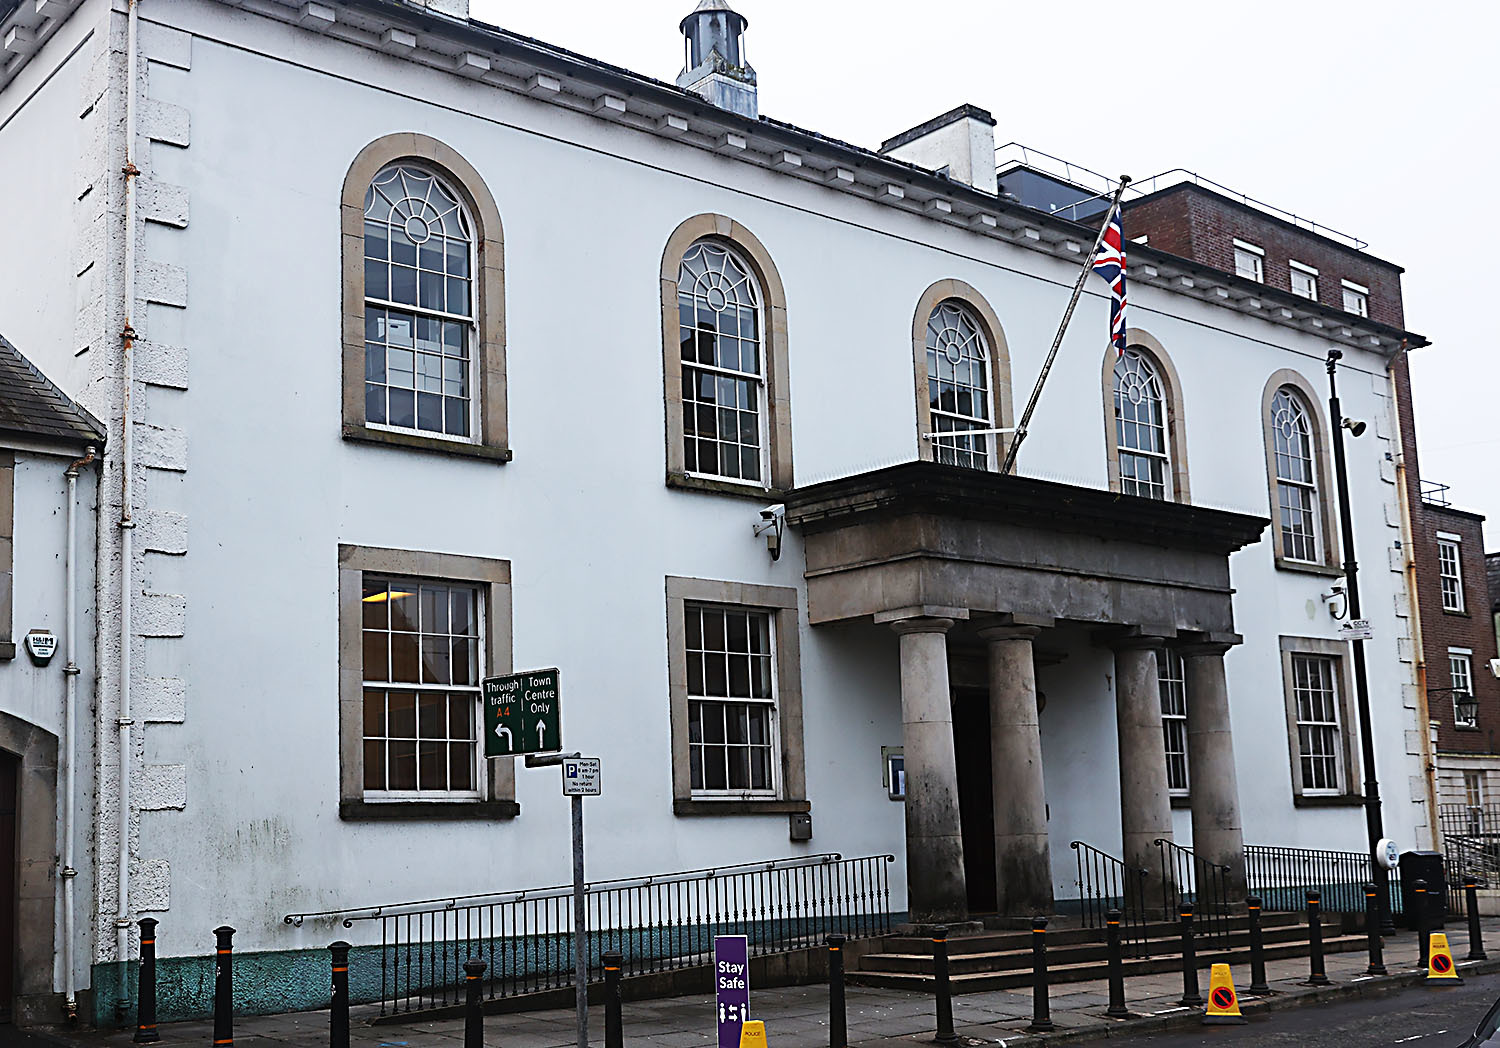 Fermanagh man treated bail conditions ‘with disdain’, says judge